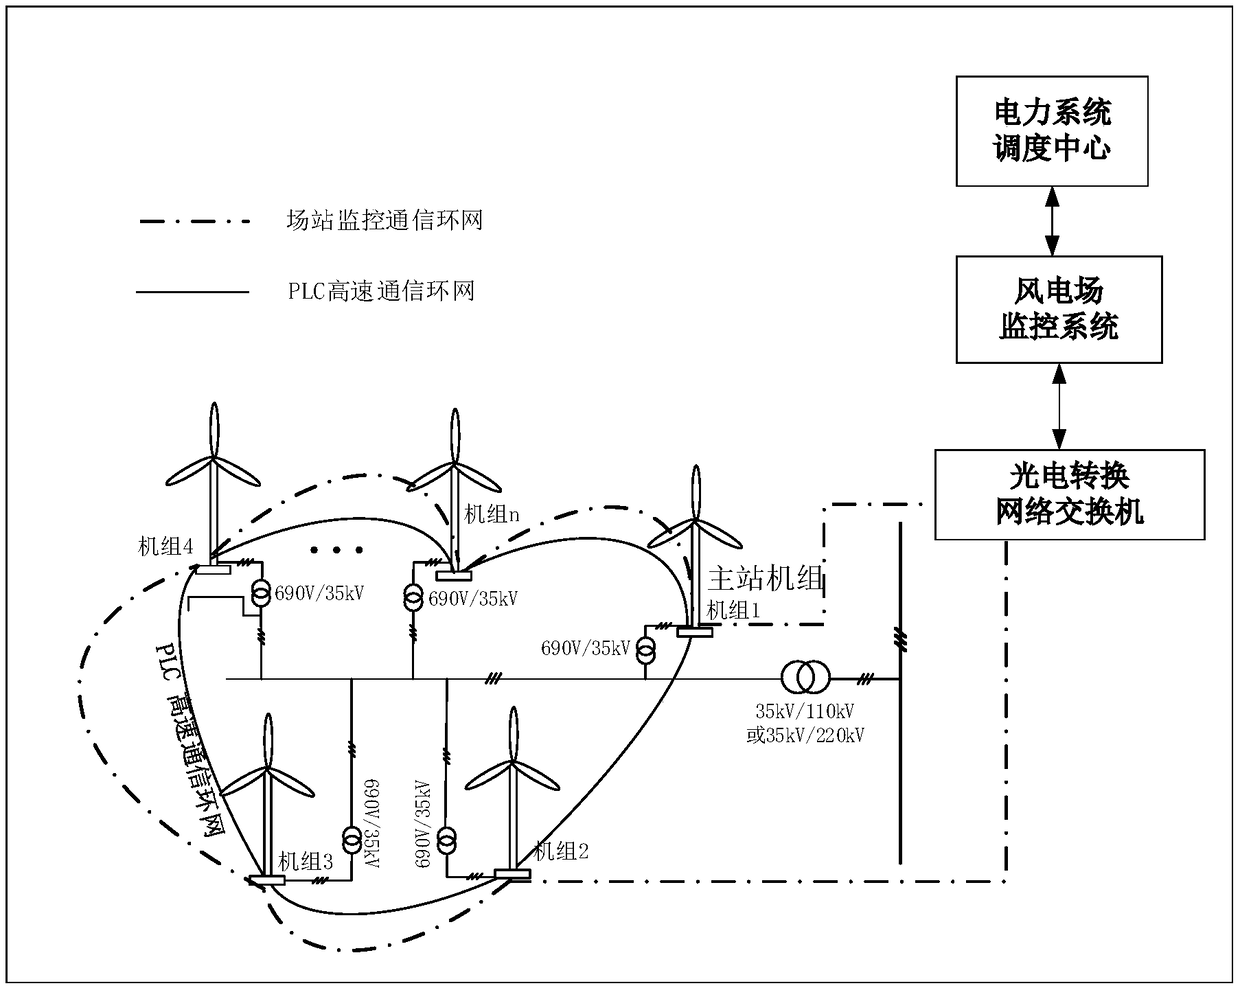 Power control method and system for wind farm unit to participate in frequency modulation and voltage regulation